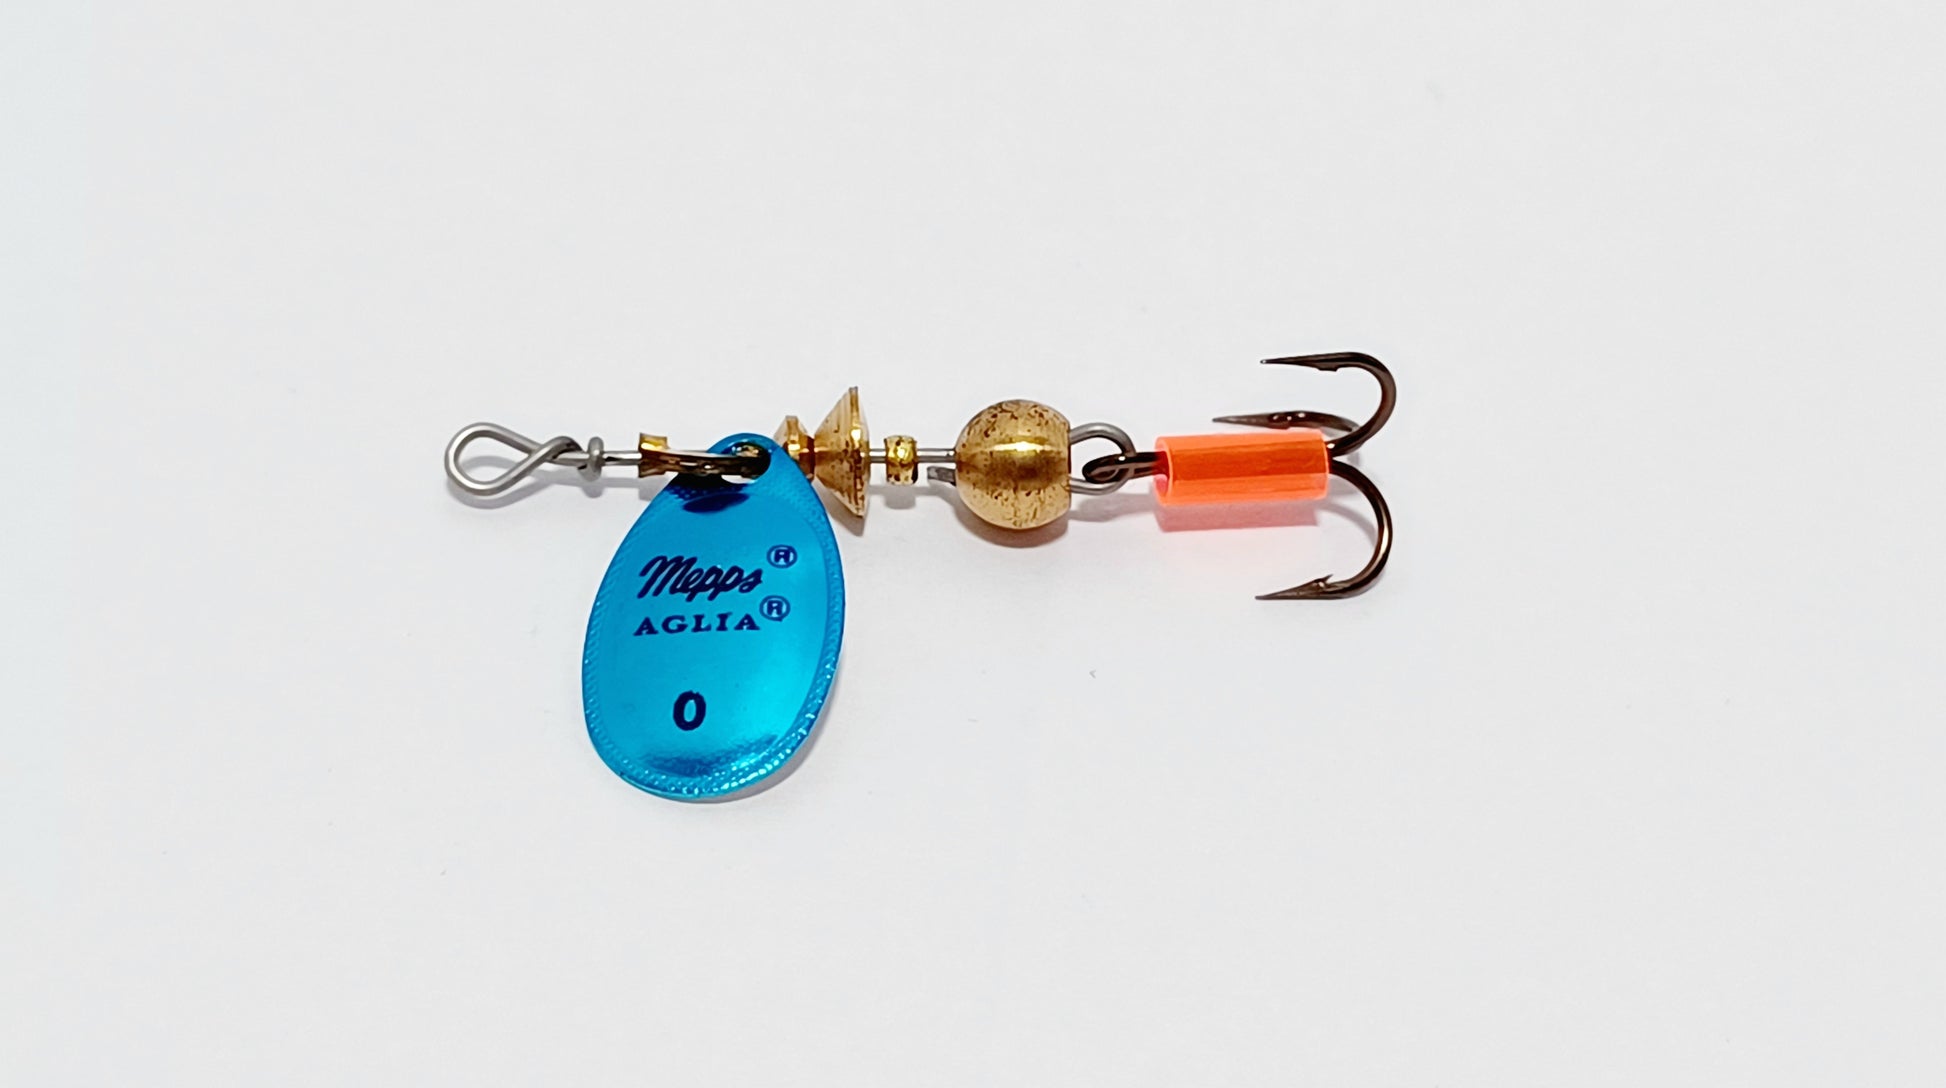 Vintage Mepps Aglia small #0 Lure in blue – Cali Bass Baits